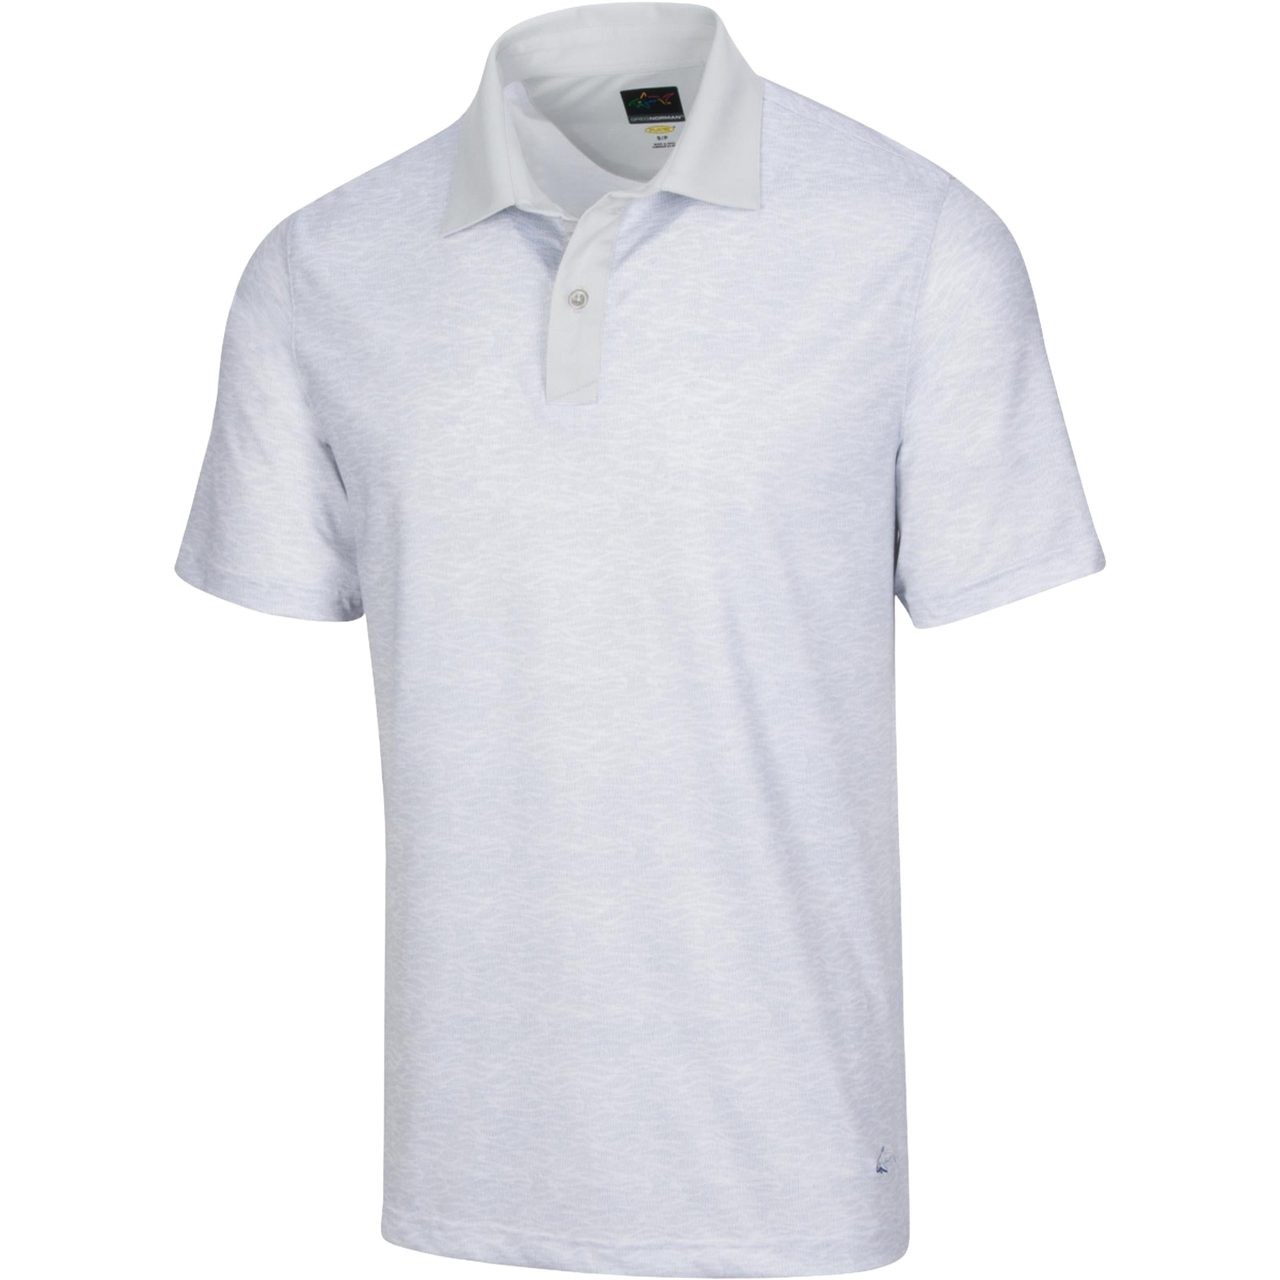 Greg Norman Lab Wave Men's Polo